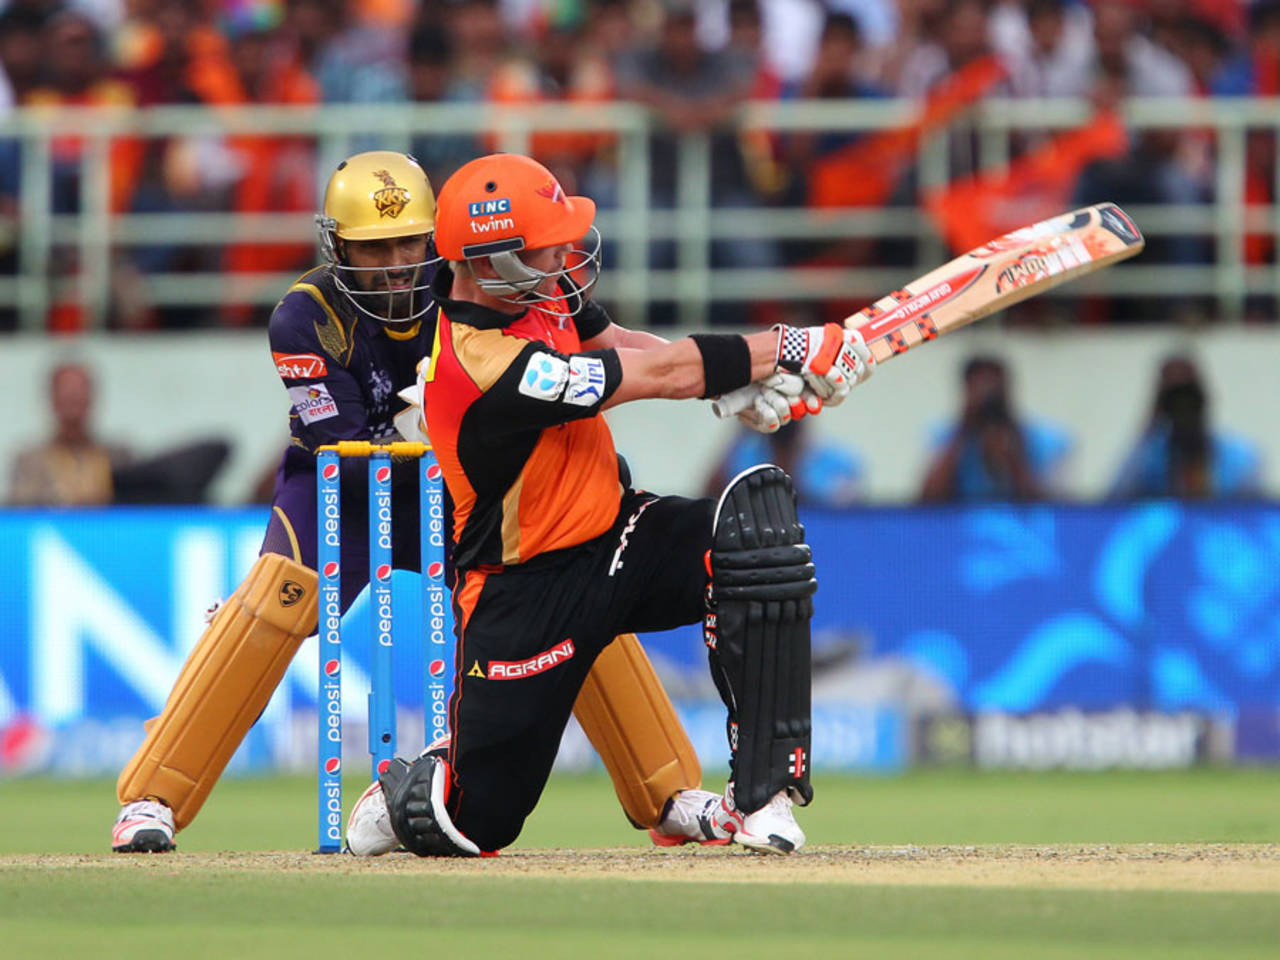 Sunrisers Hyderabad were inserted in Visakhapatnam, and David Warner made early inroads, bringing out the switch hit to maximum effect&nbsp;&nbsp;&bull;&nbsp;&nbsp;BCCI